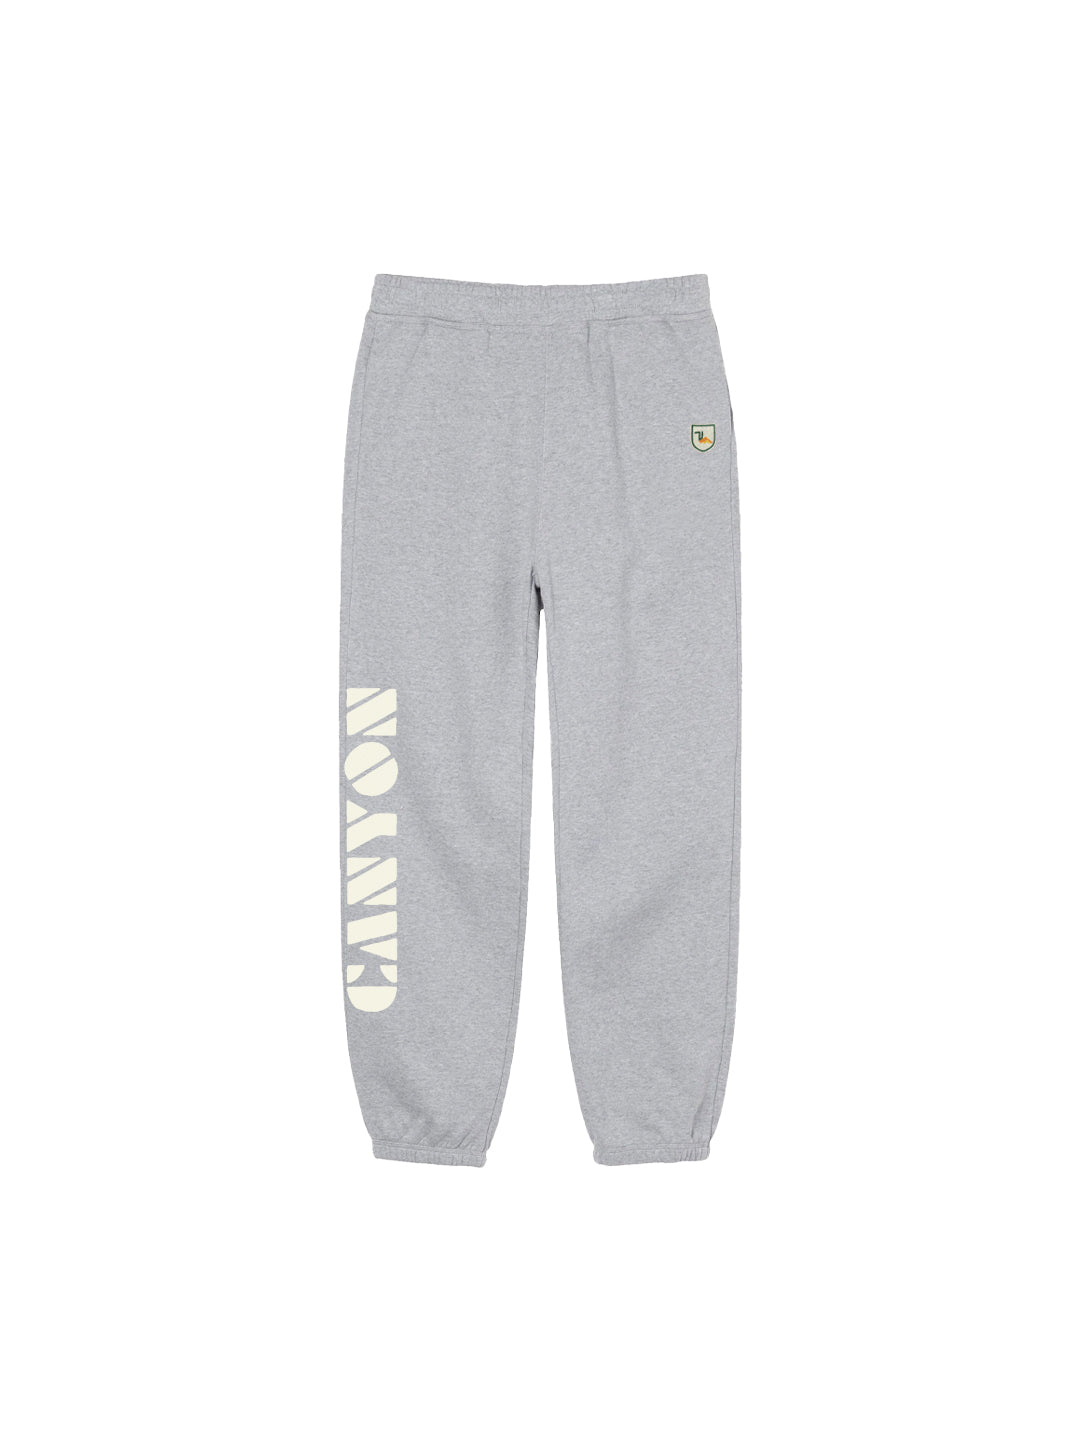 Canyon Block Youth Sweatpants in Heather Grey